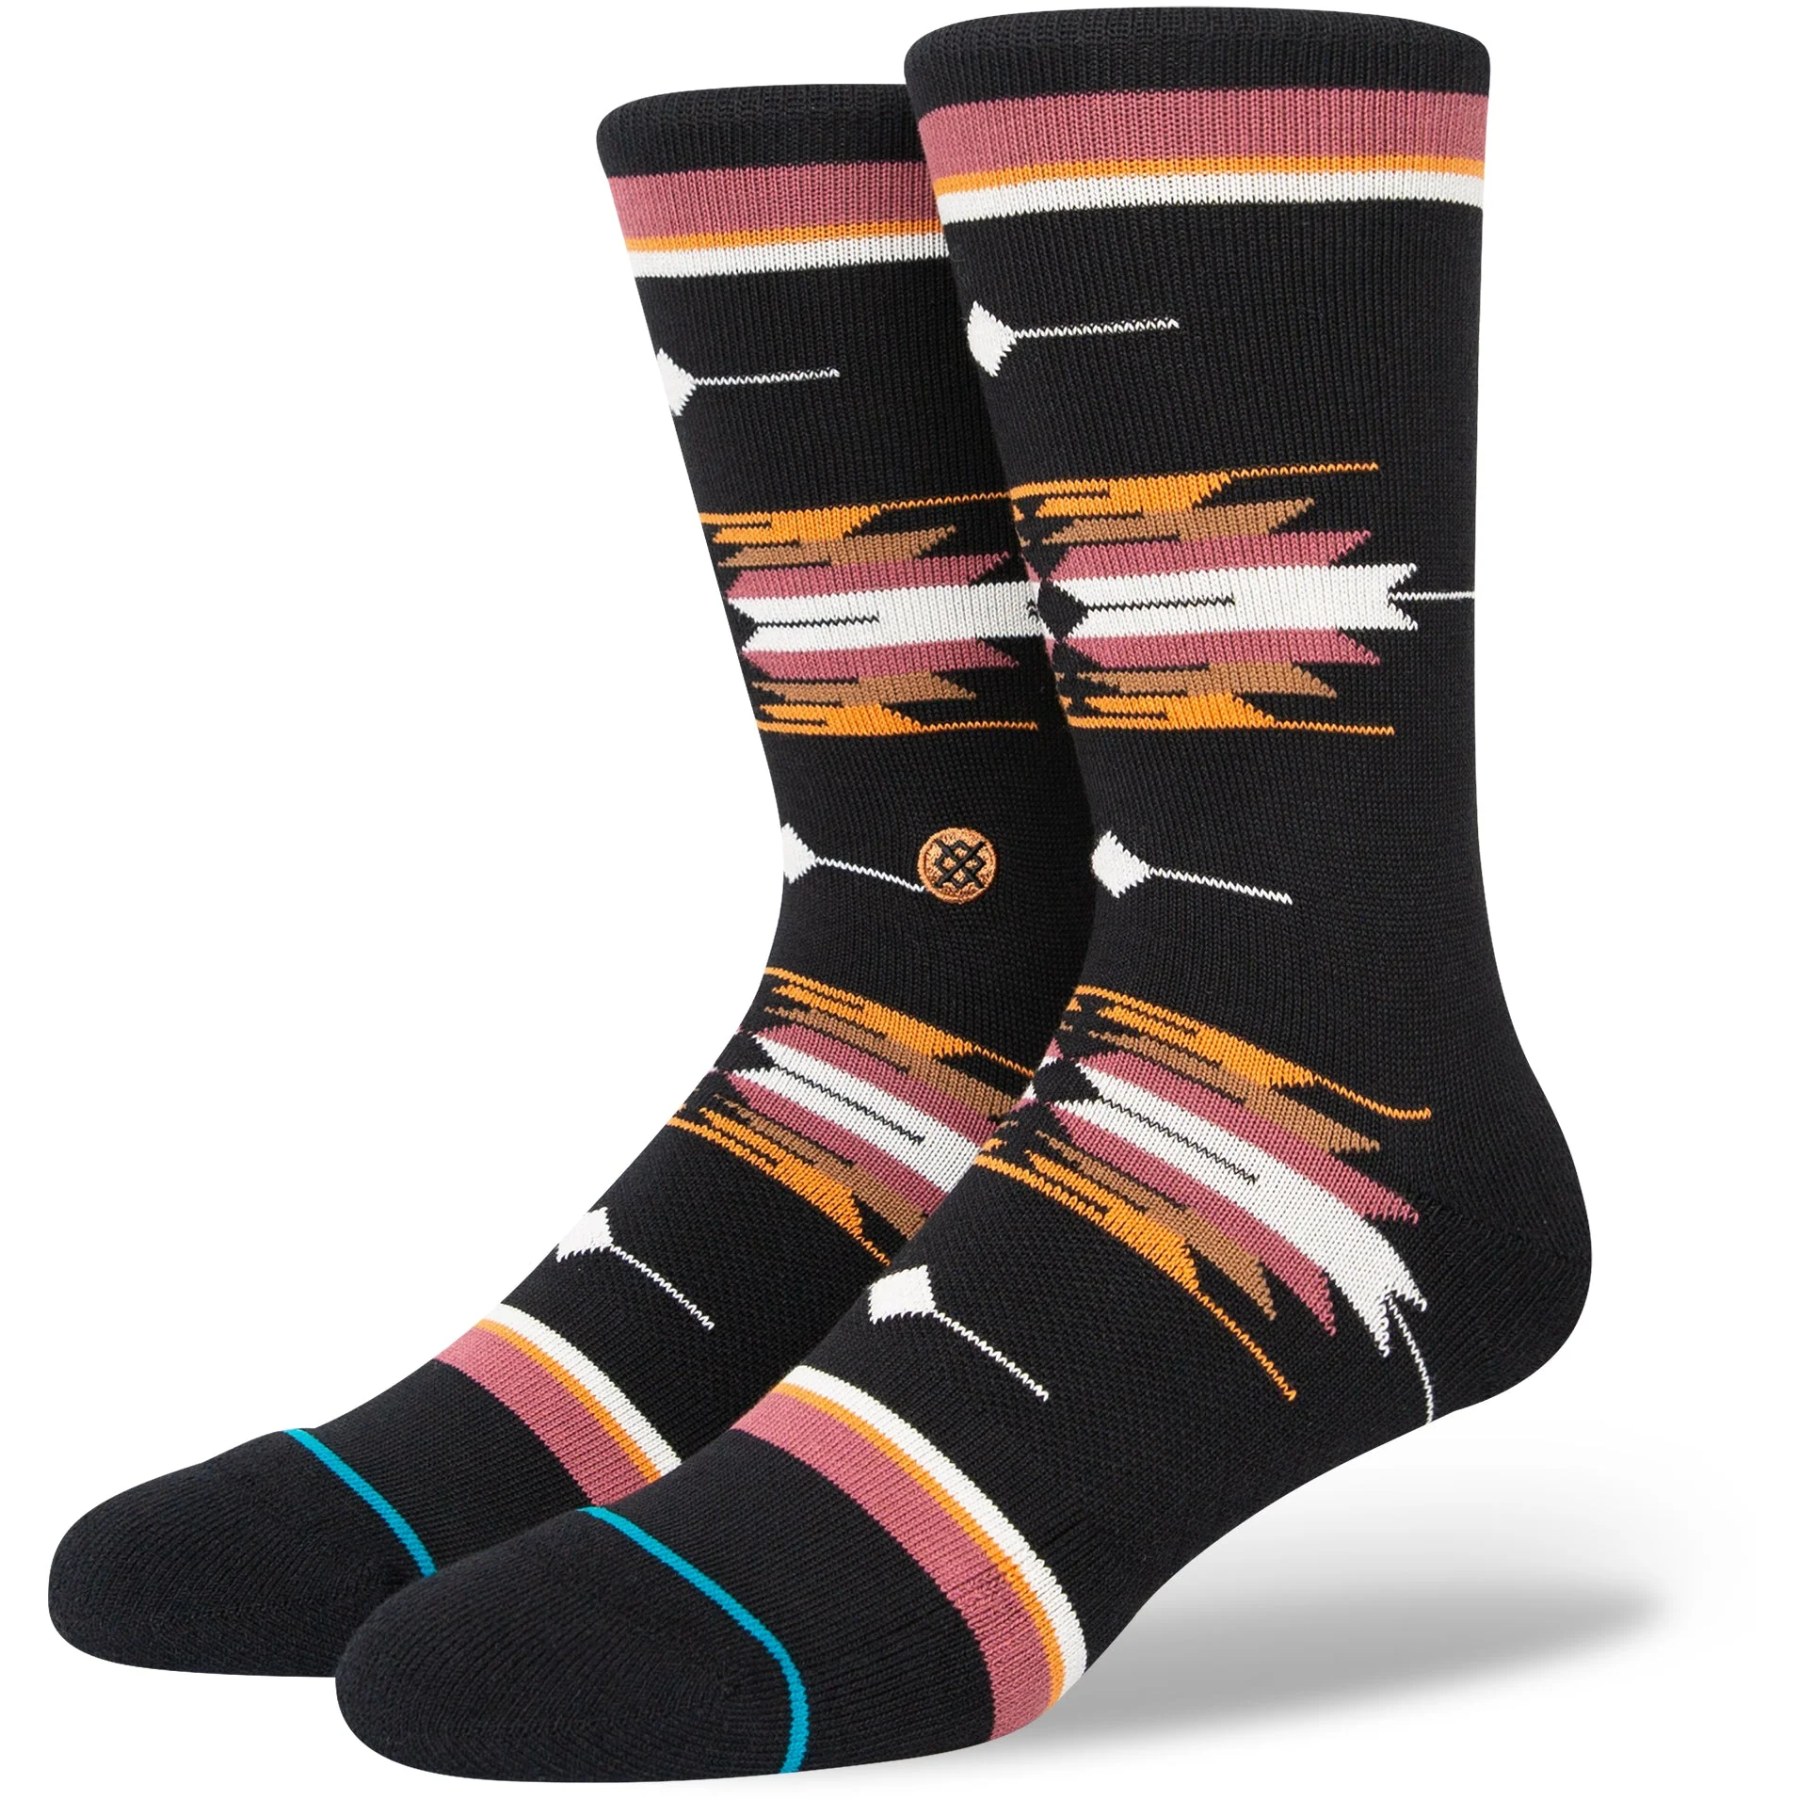 Picture of Stance Cloaked Crew Socks Unisex - washedblack